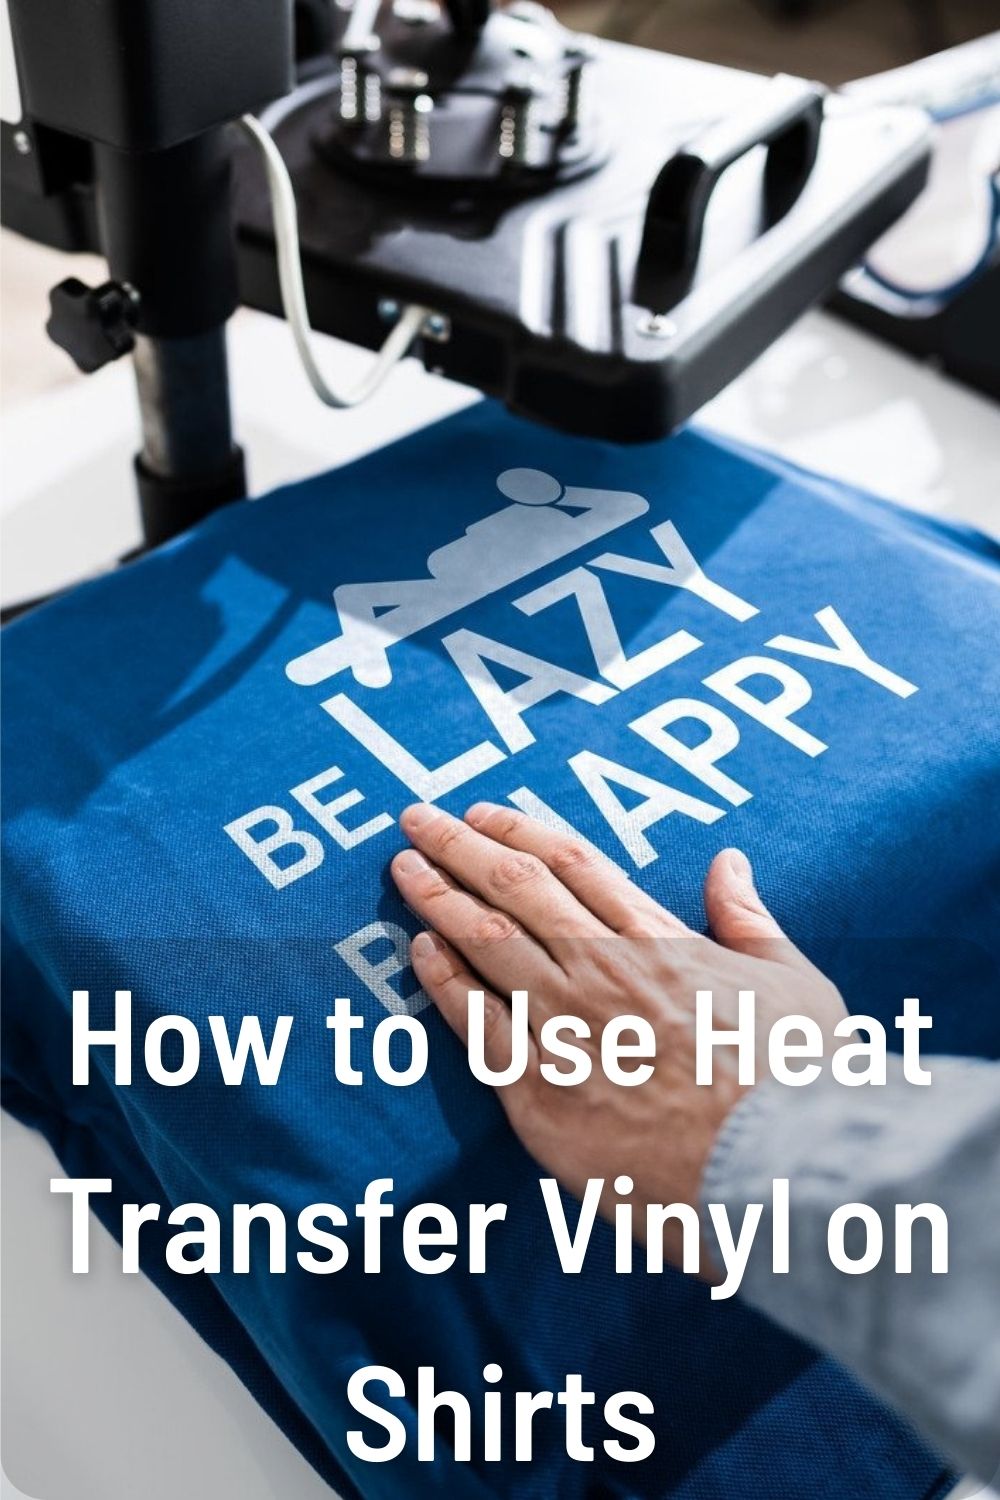 How to Use Heat Transfer Vinyl on Shirts